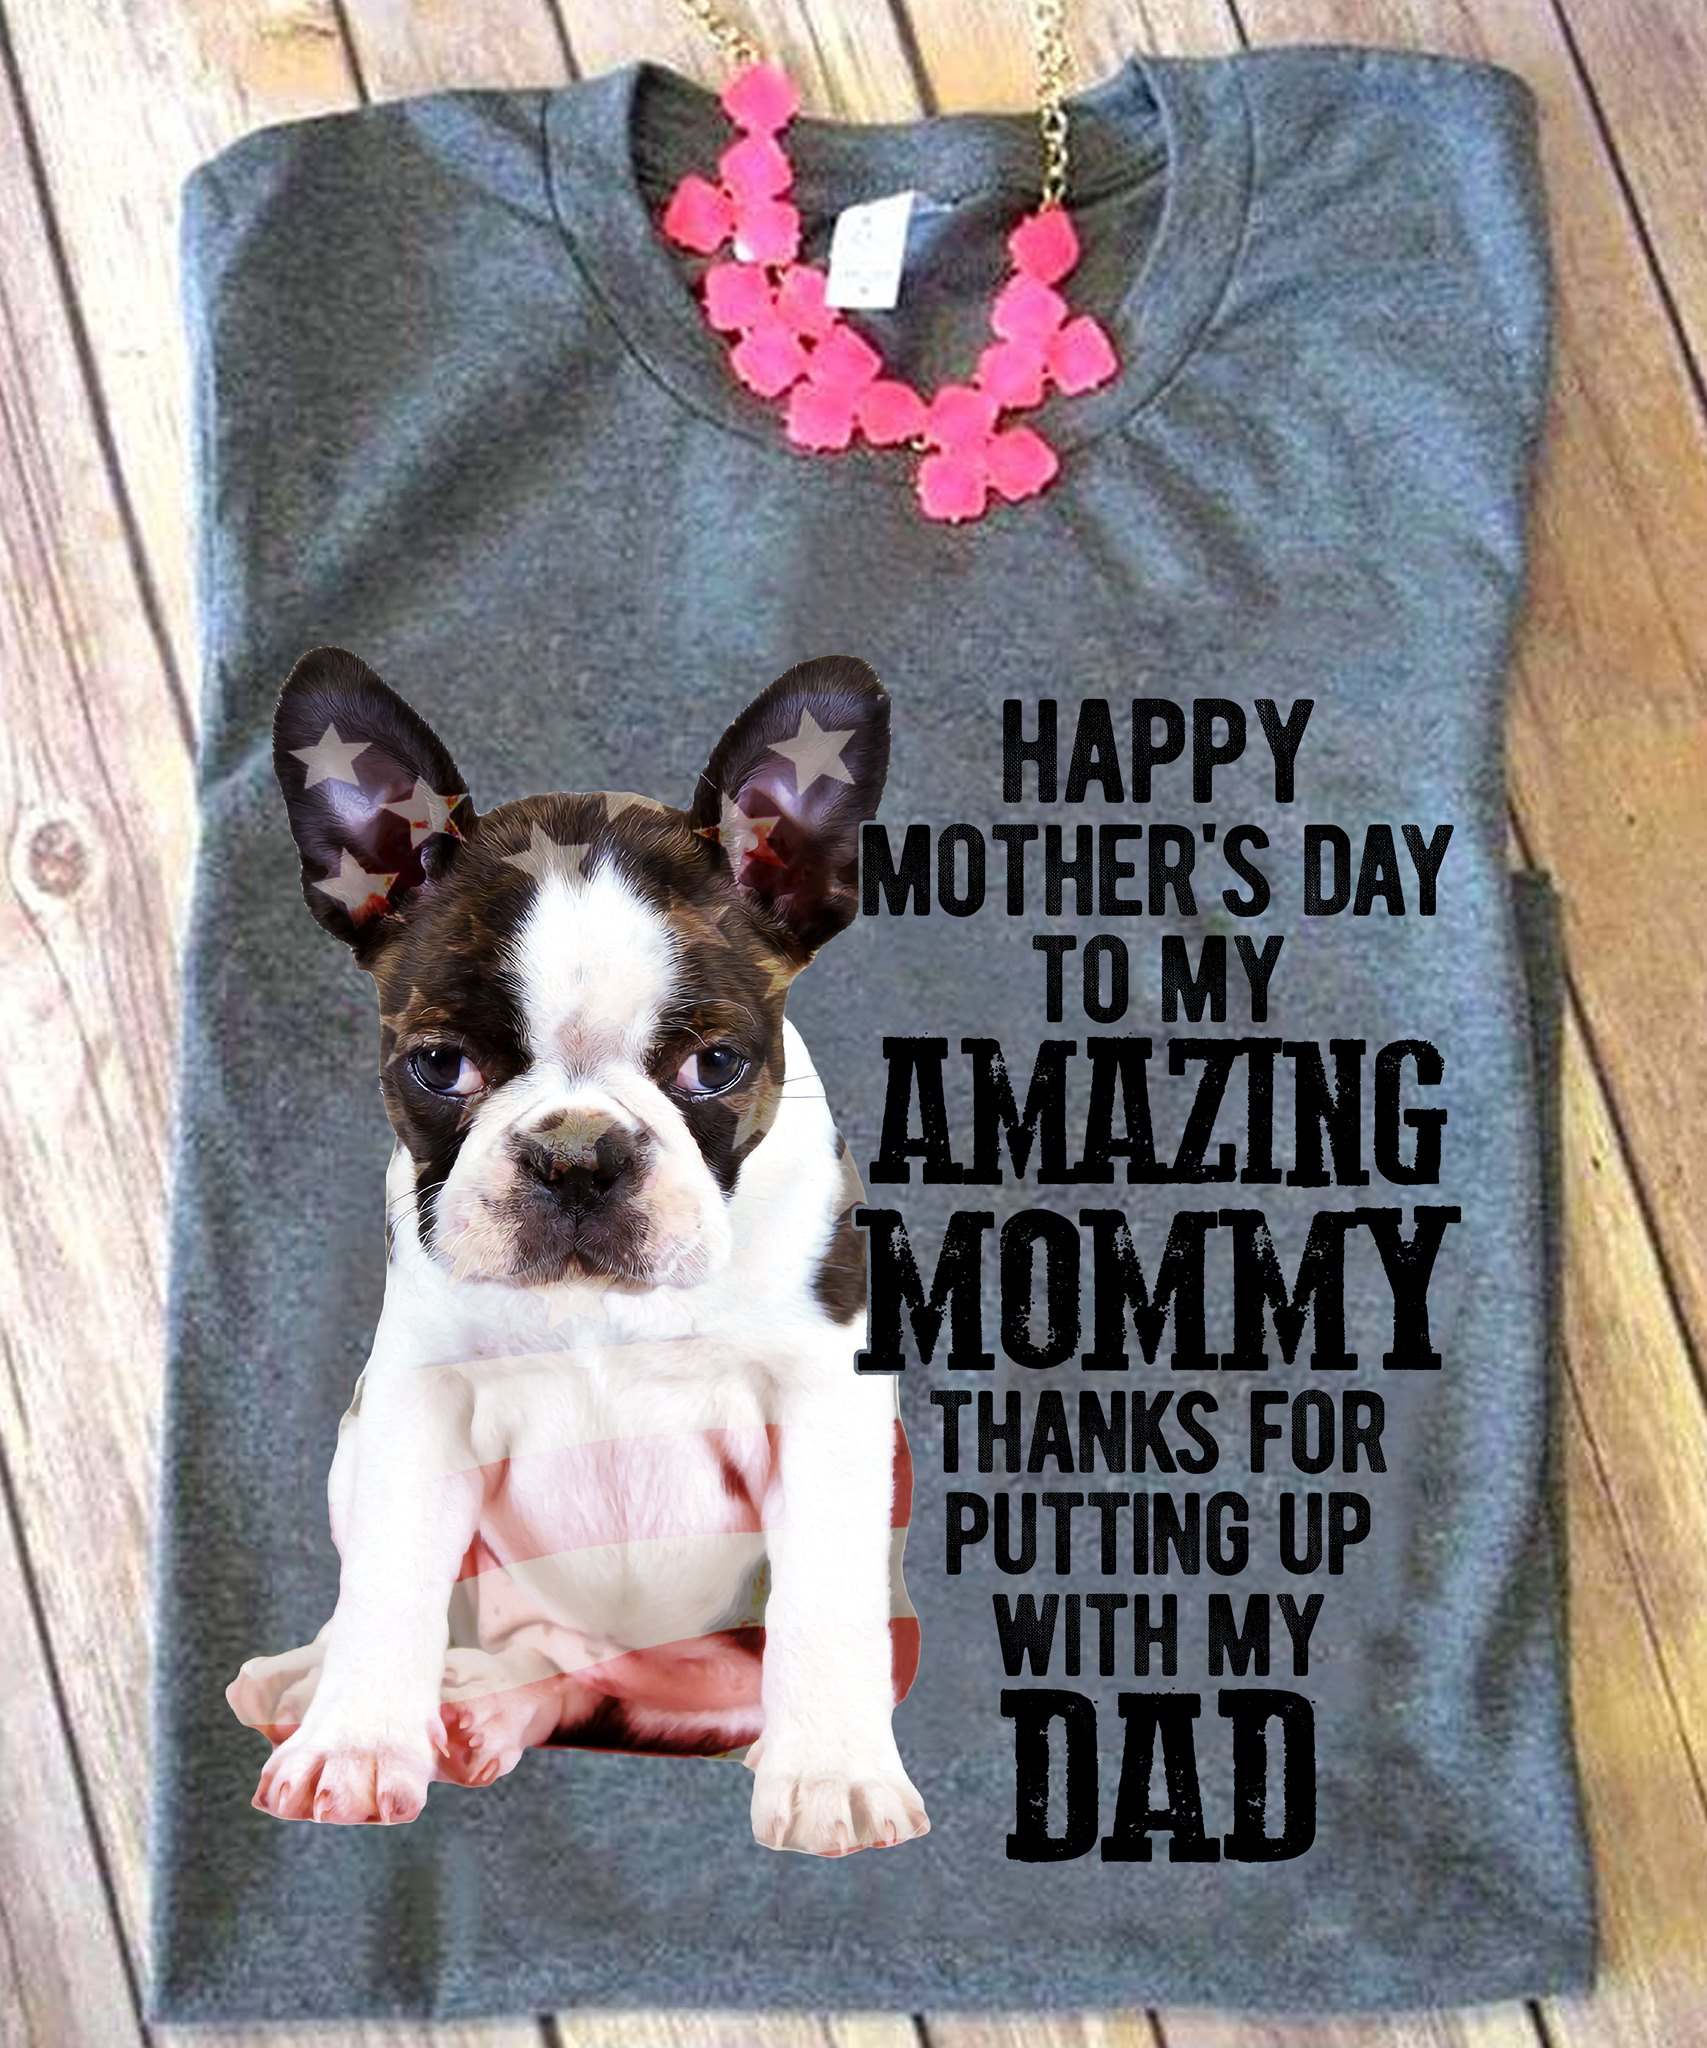 Happy mother's day to my amazing mommy thanks for putting up with my dad - Frenchie dog